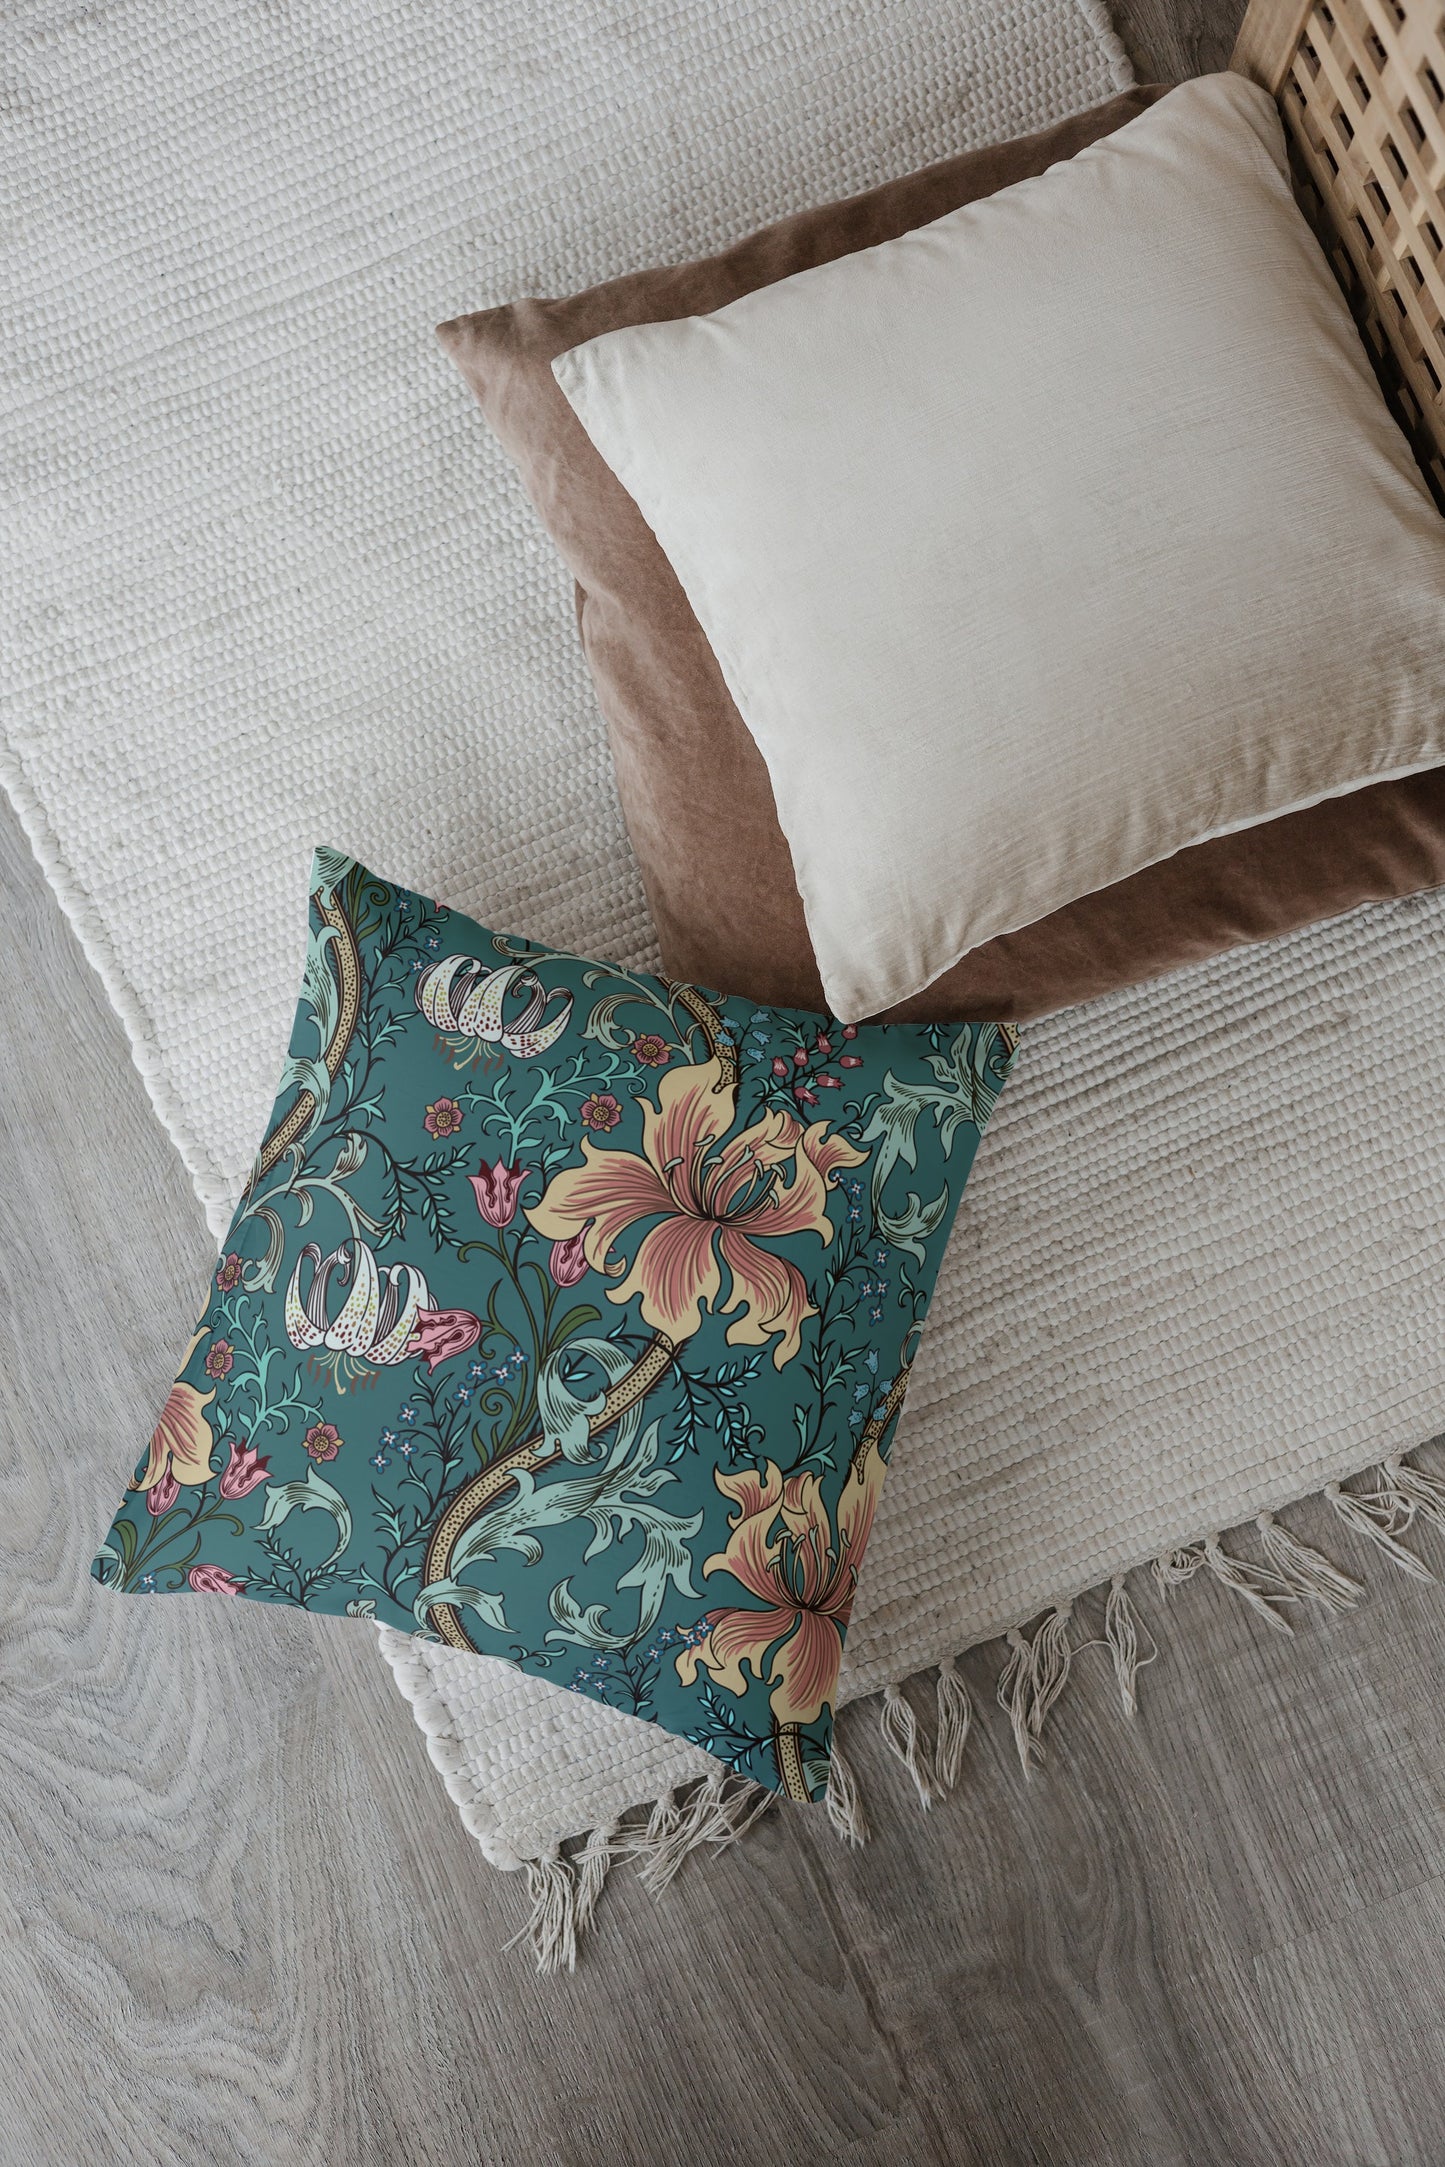 William Morris Cotton Pillows Enchanted Golden Lily Forest Teal